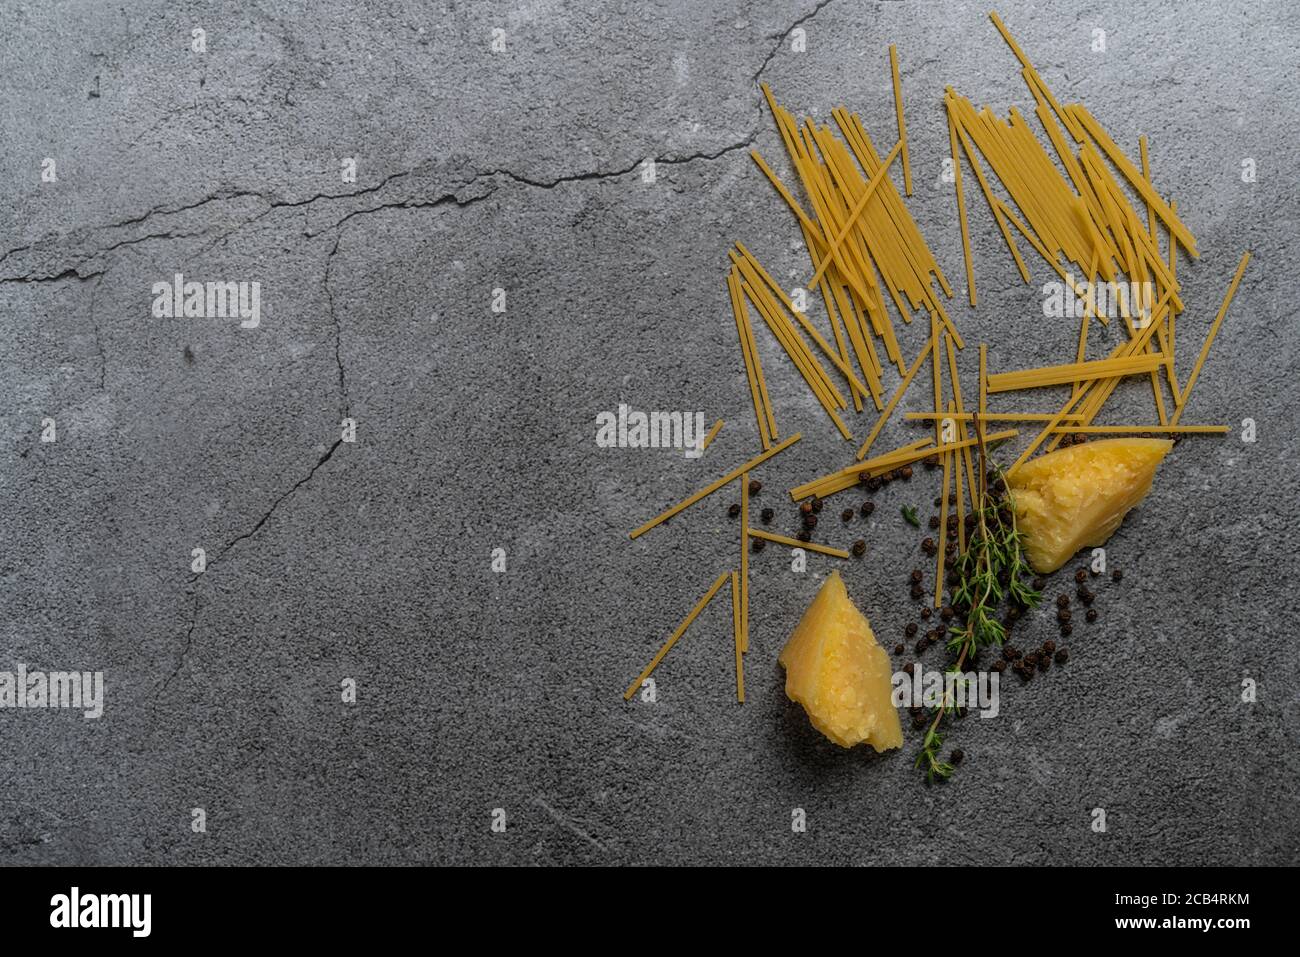 Yellow pasta on a gray background. Spaghetti on cement background. Raw spaghetti bolognese. Food background concept. Top view Stock Photo